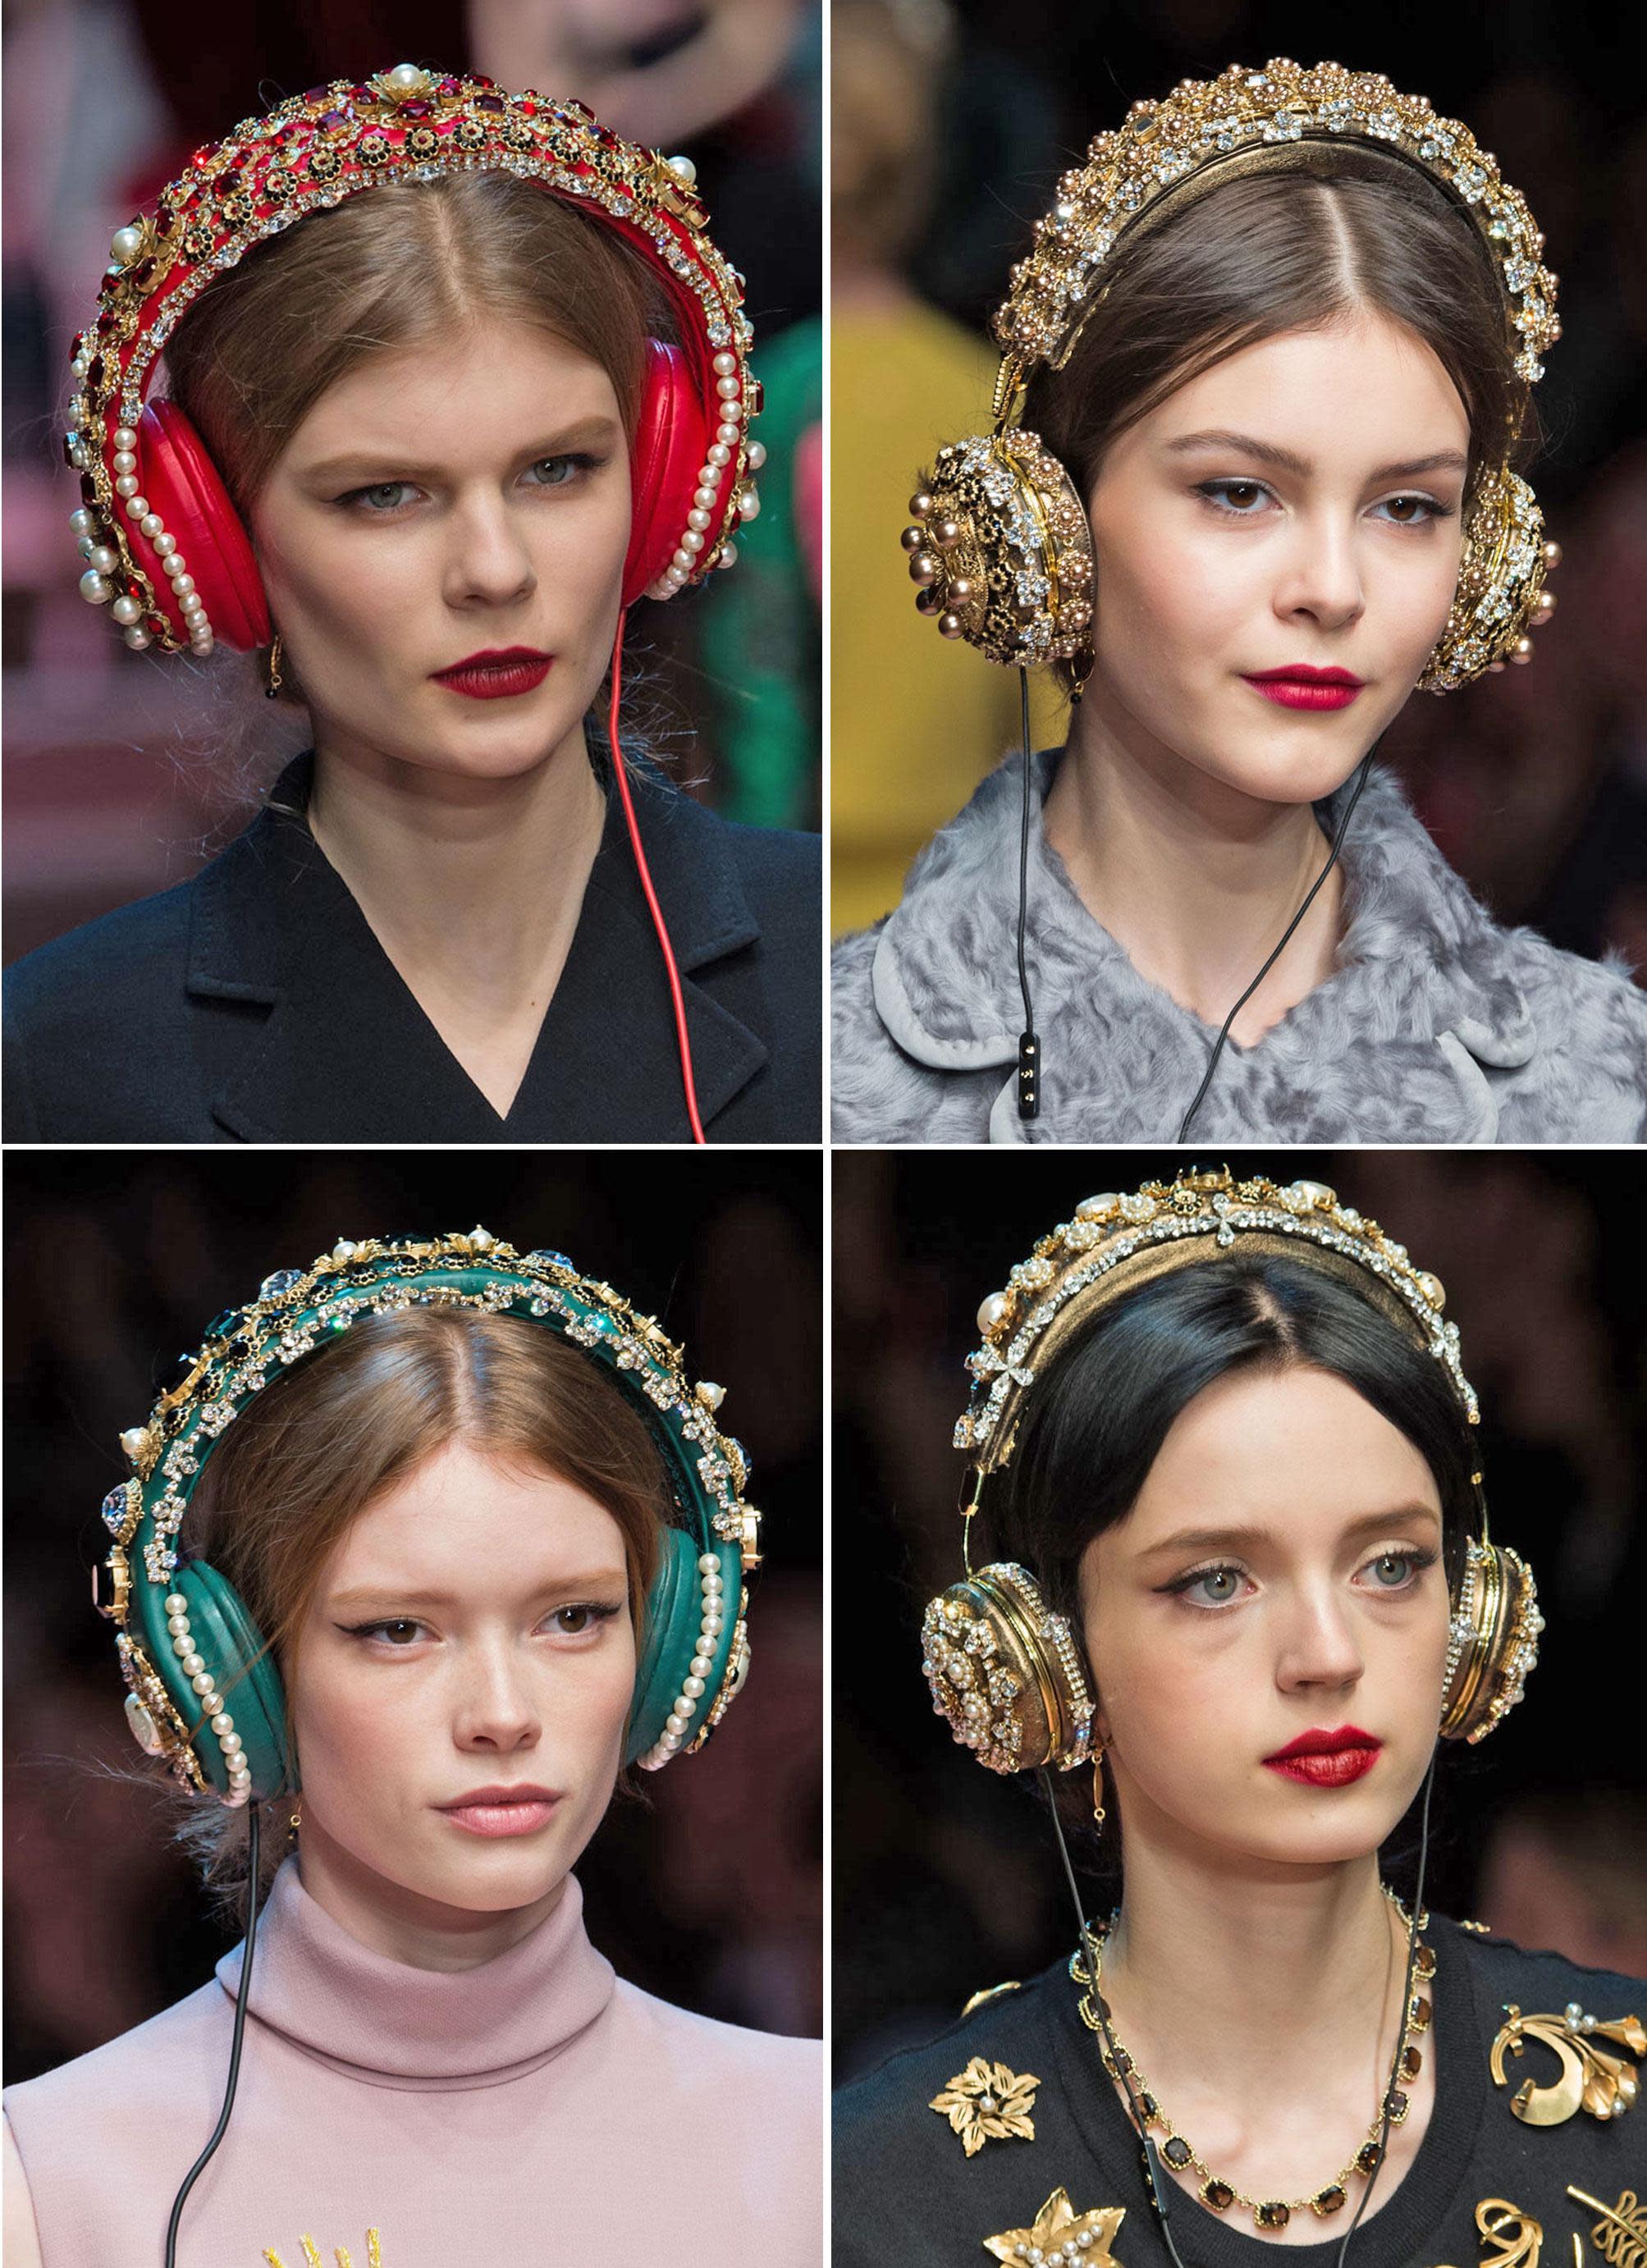 You Can Buy Dolce & Gabbana's Bejeweled Headphones for $7K